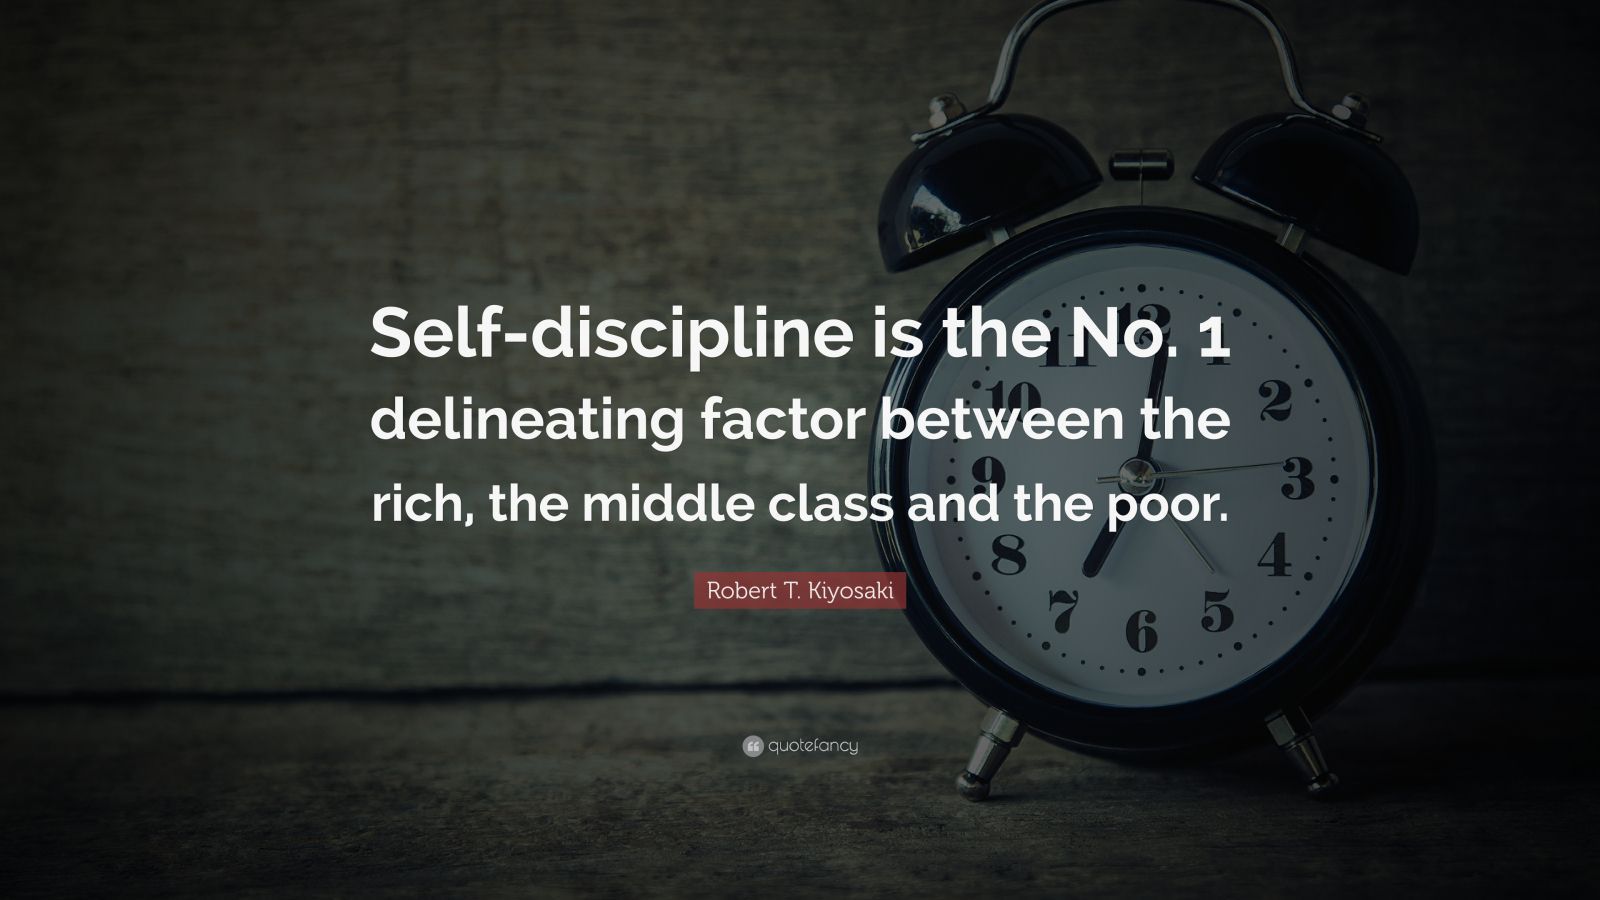 608513 One discipline always leads to another discipline  Jim Rohn quote   Rare Gallery HD Wallpapers